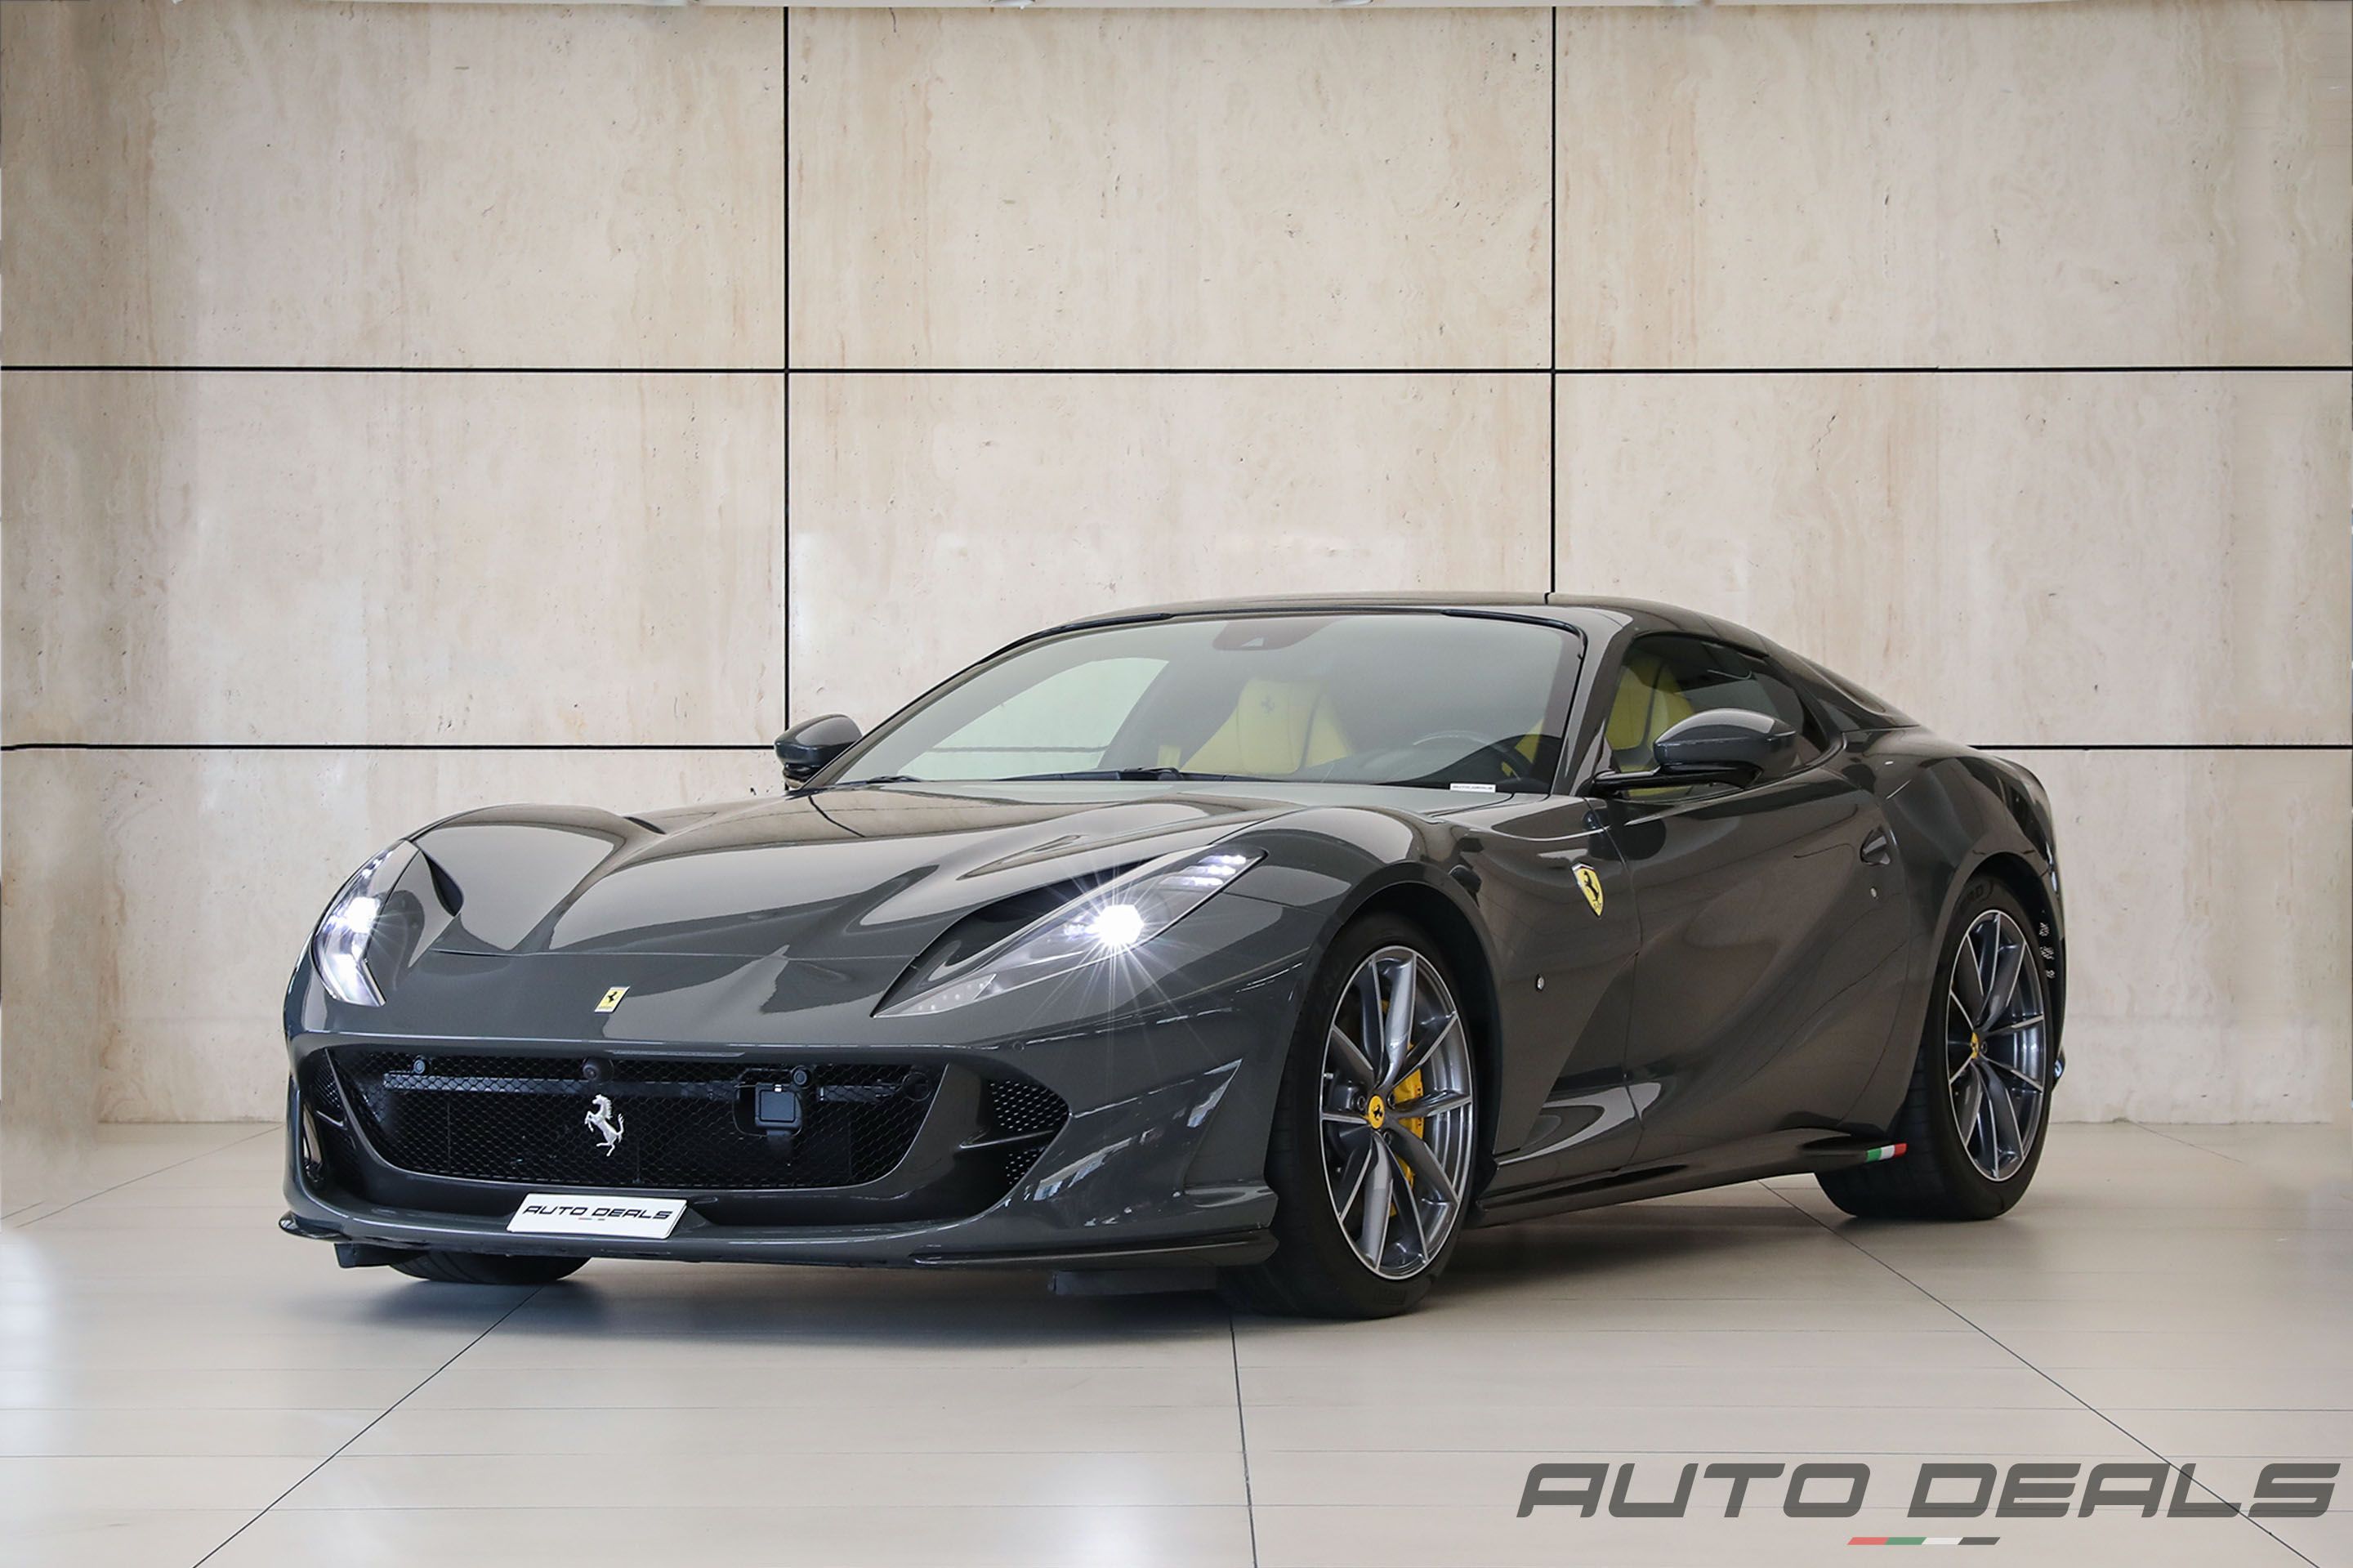 Ferrari 812 GTS | 2022 - GCC- Warranty - Service Contract - Extremely Low Mileage - Top of the Line | 6.5L V12